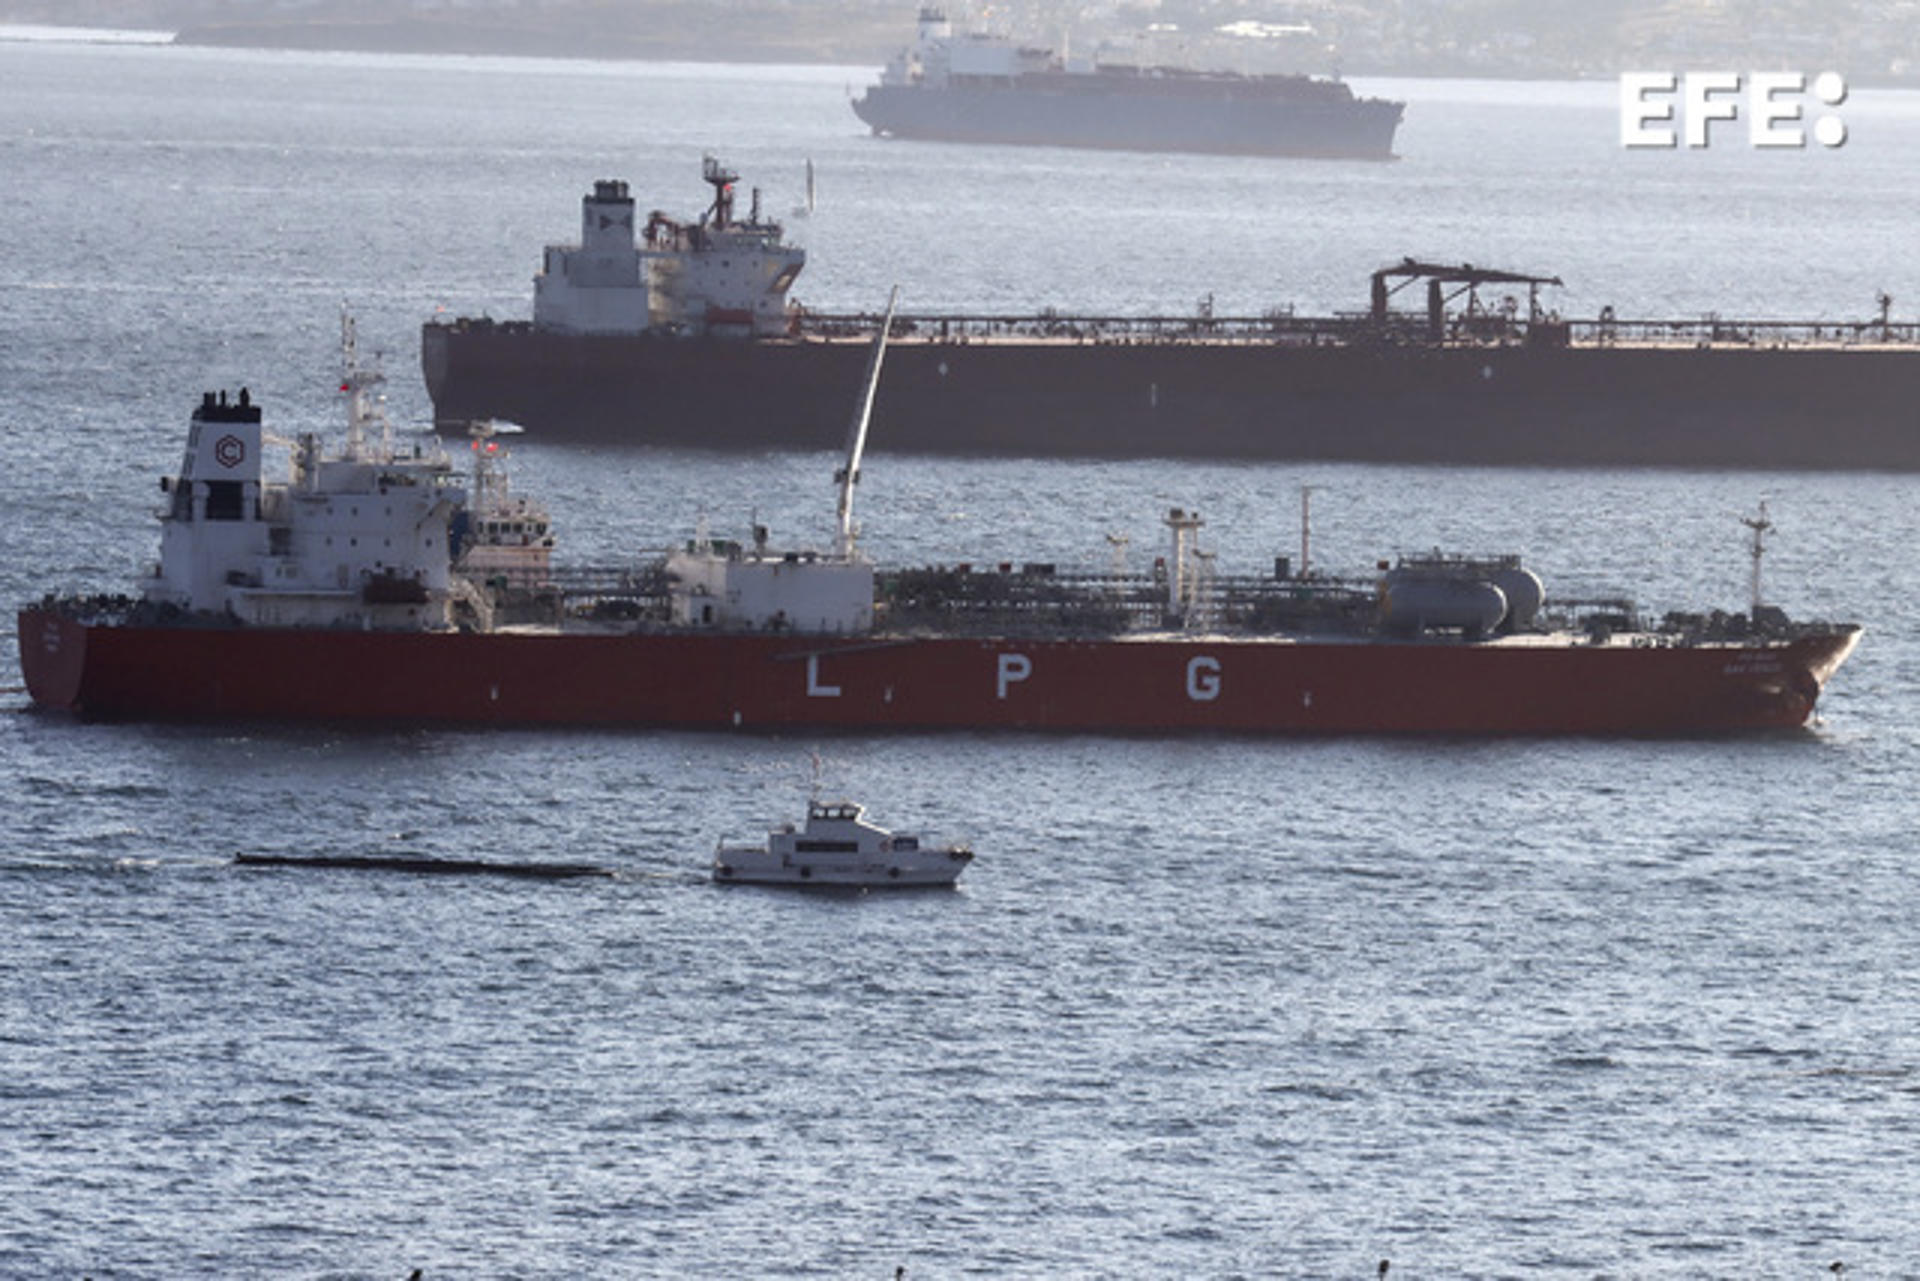 The Captain of the Port of Gibraltar called a halt to operations on 1 August 2023 after oil was spilled during a transfer a fuel from one vessel to another. EFE/A.Carrasco Ragel